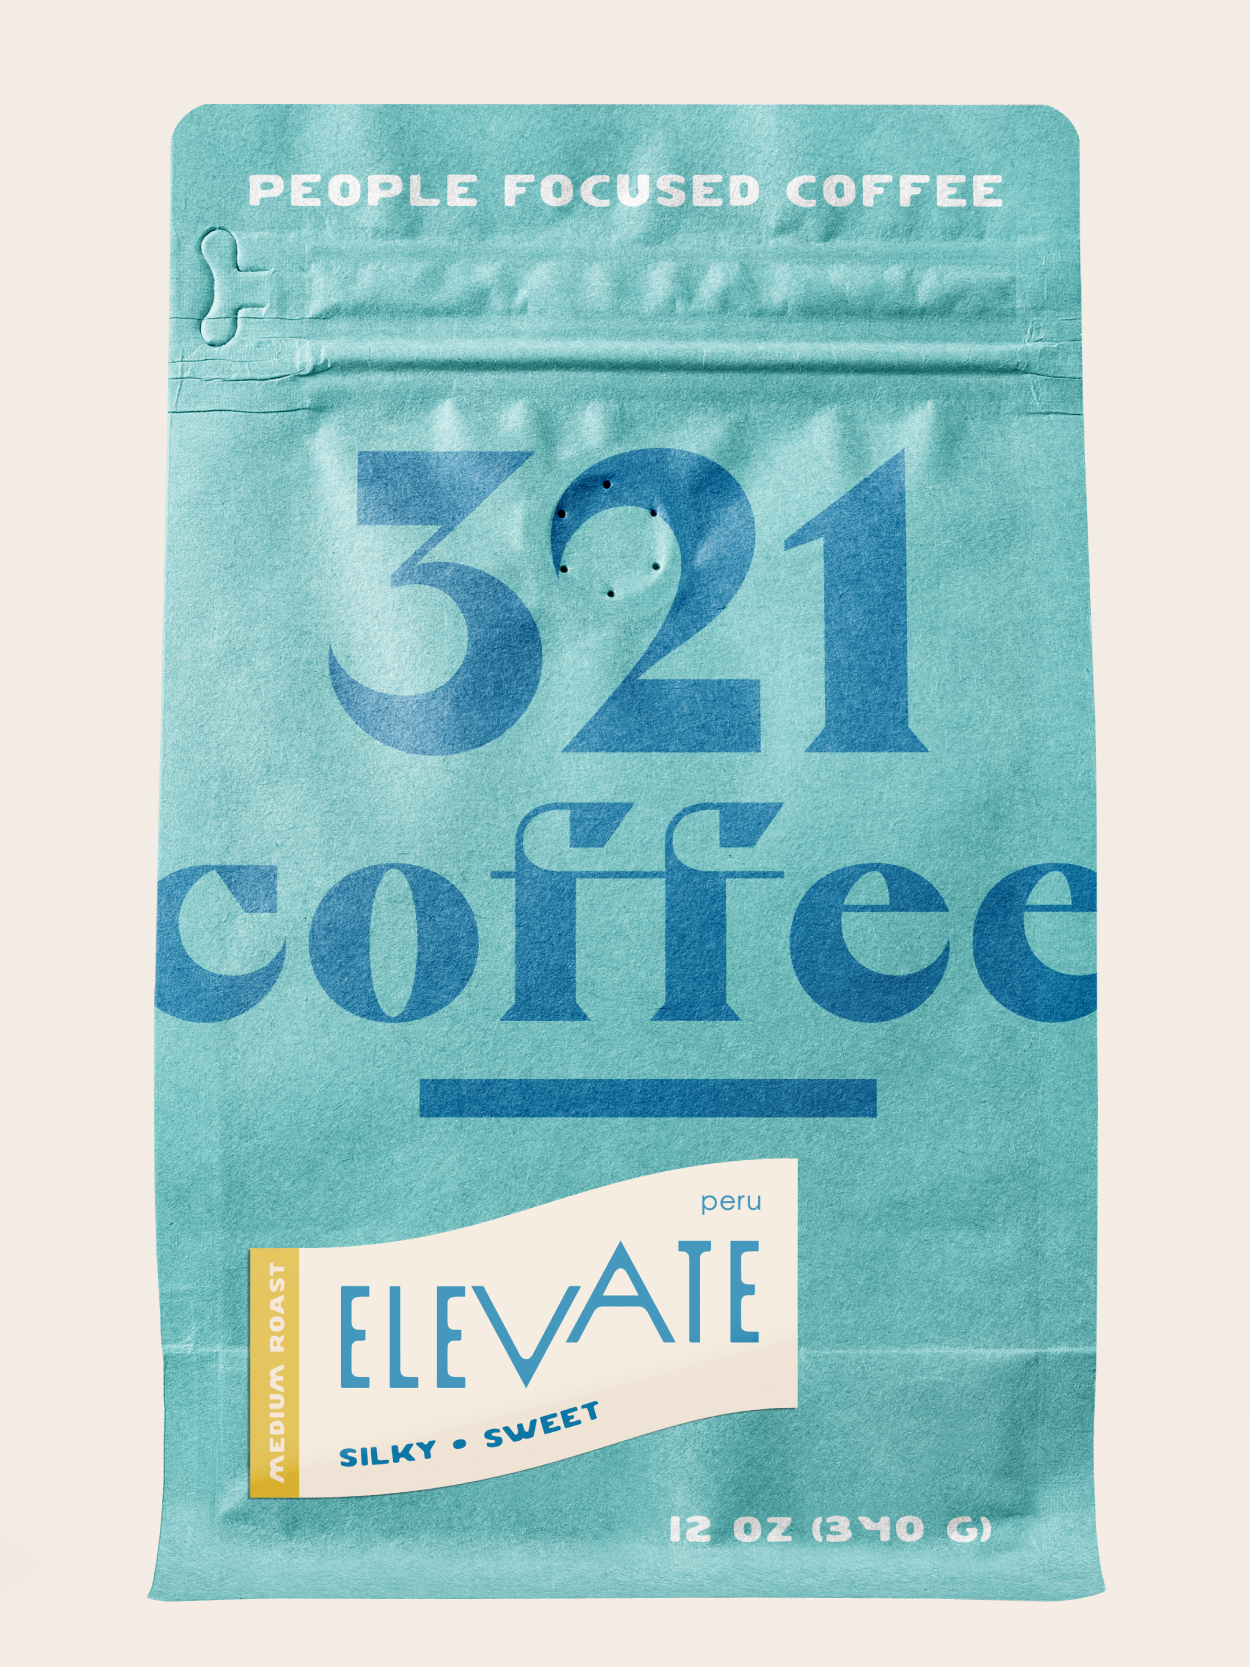 An image of 321's Elevate coffee. When hovered over, the text Elevate Medium Roast, Silky and Sweet, Peru, appears above the bag.